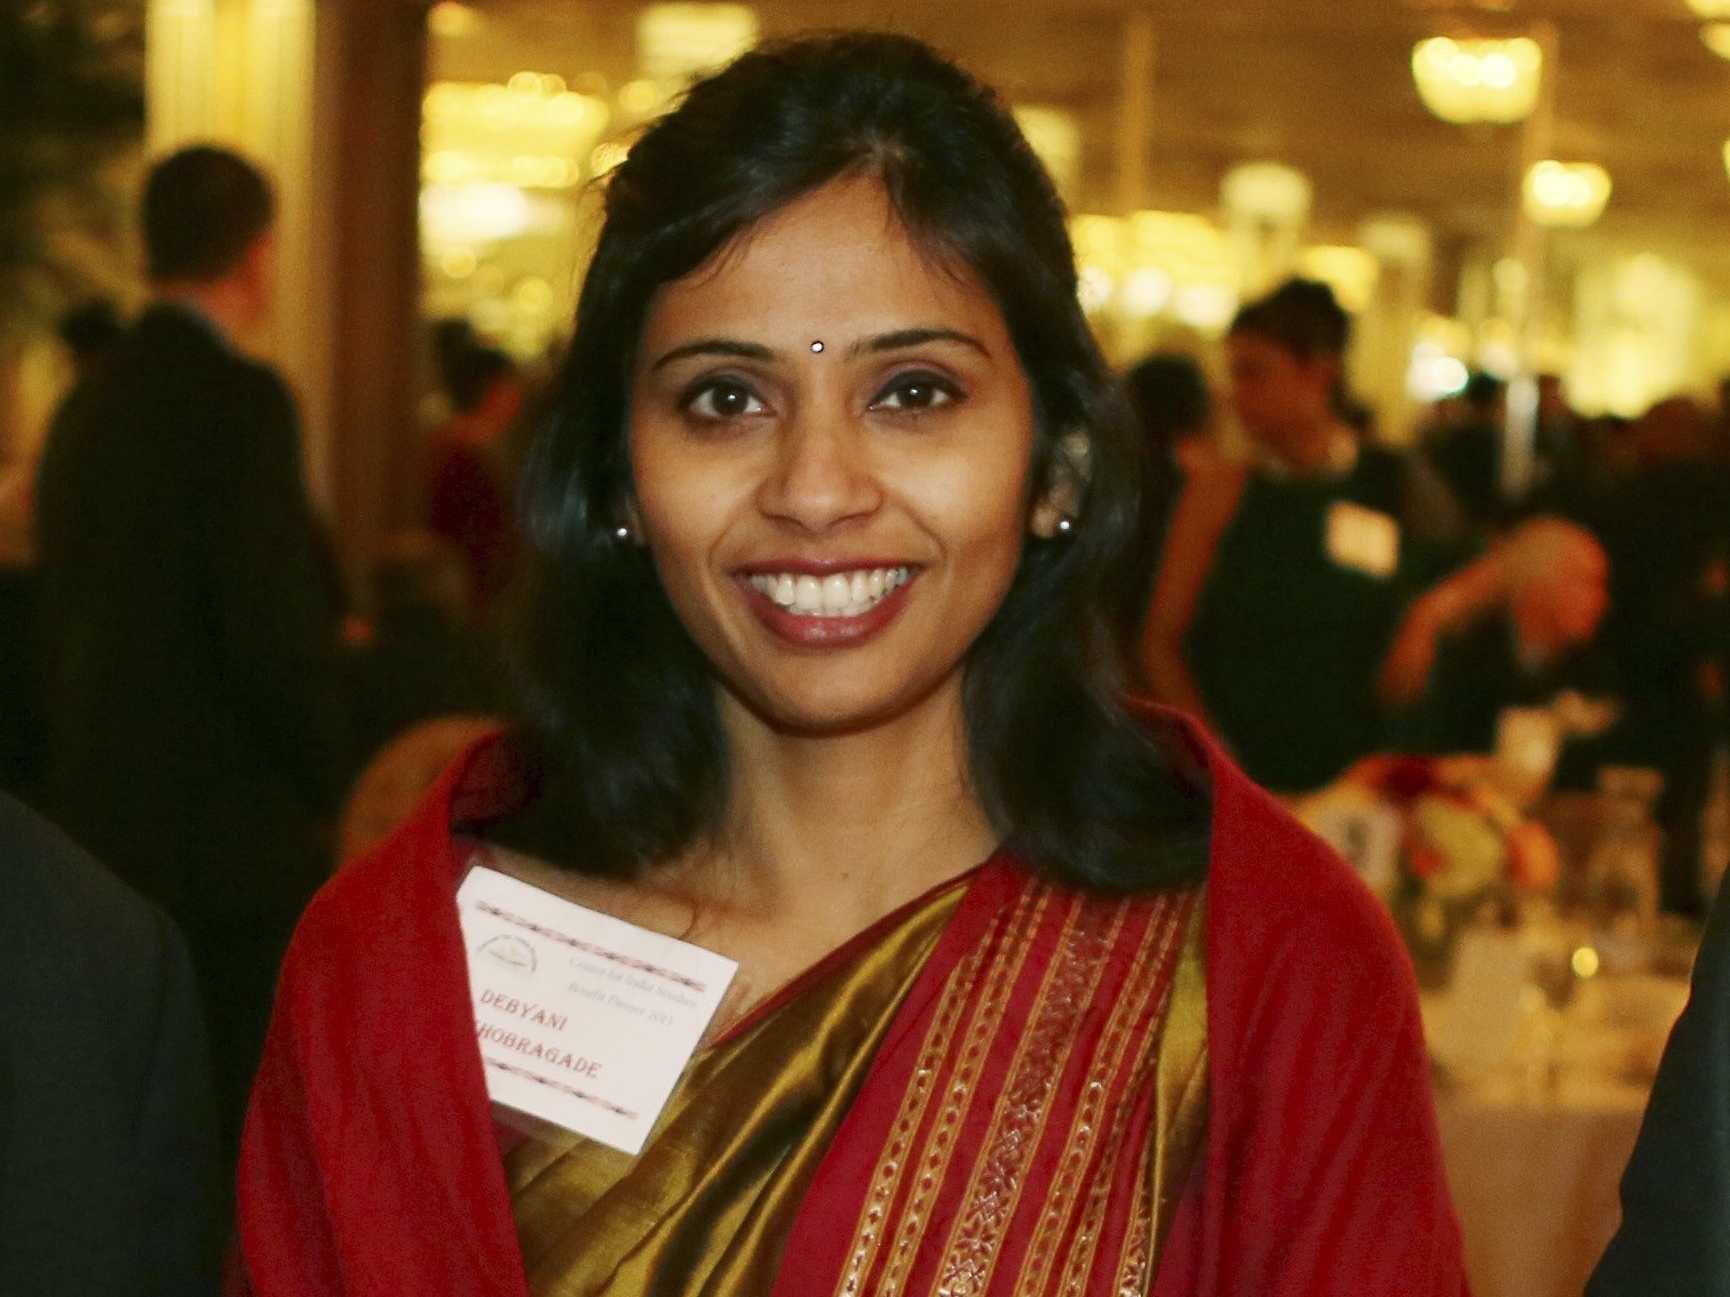 indian-diplomat-strip-searched-in-new-york-has-been-indicted-for-drastically-underpaying-her-maid.jpg